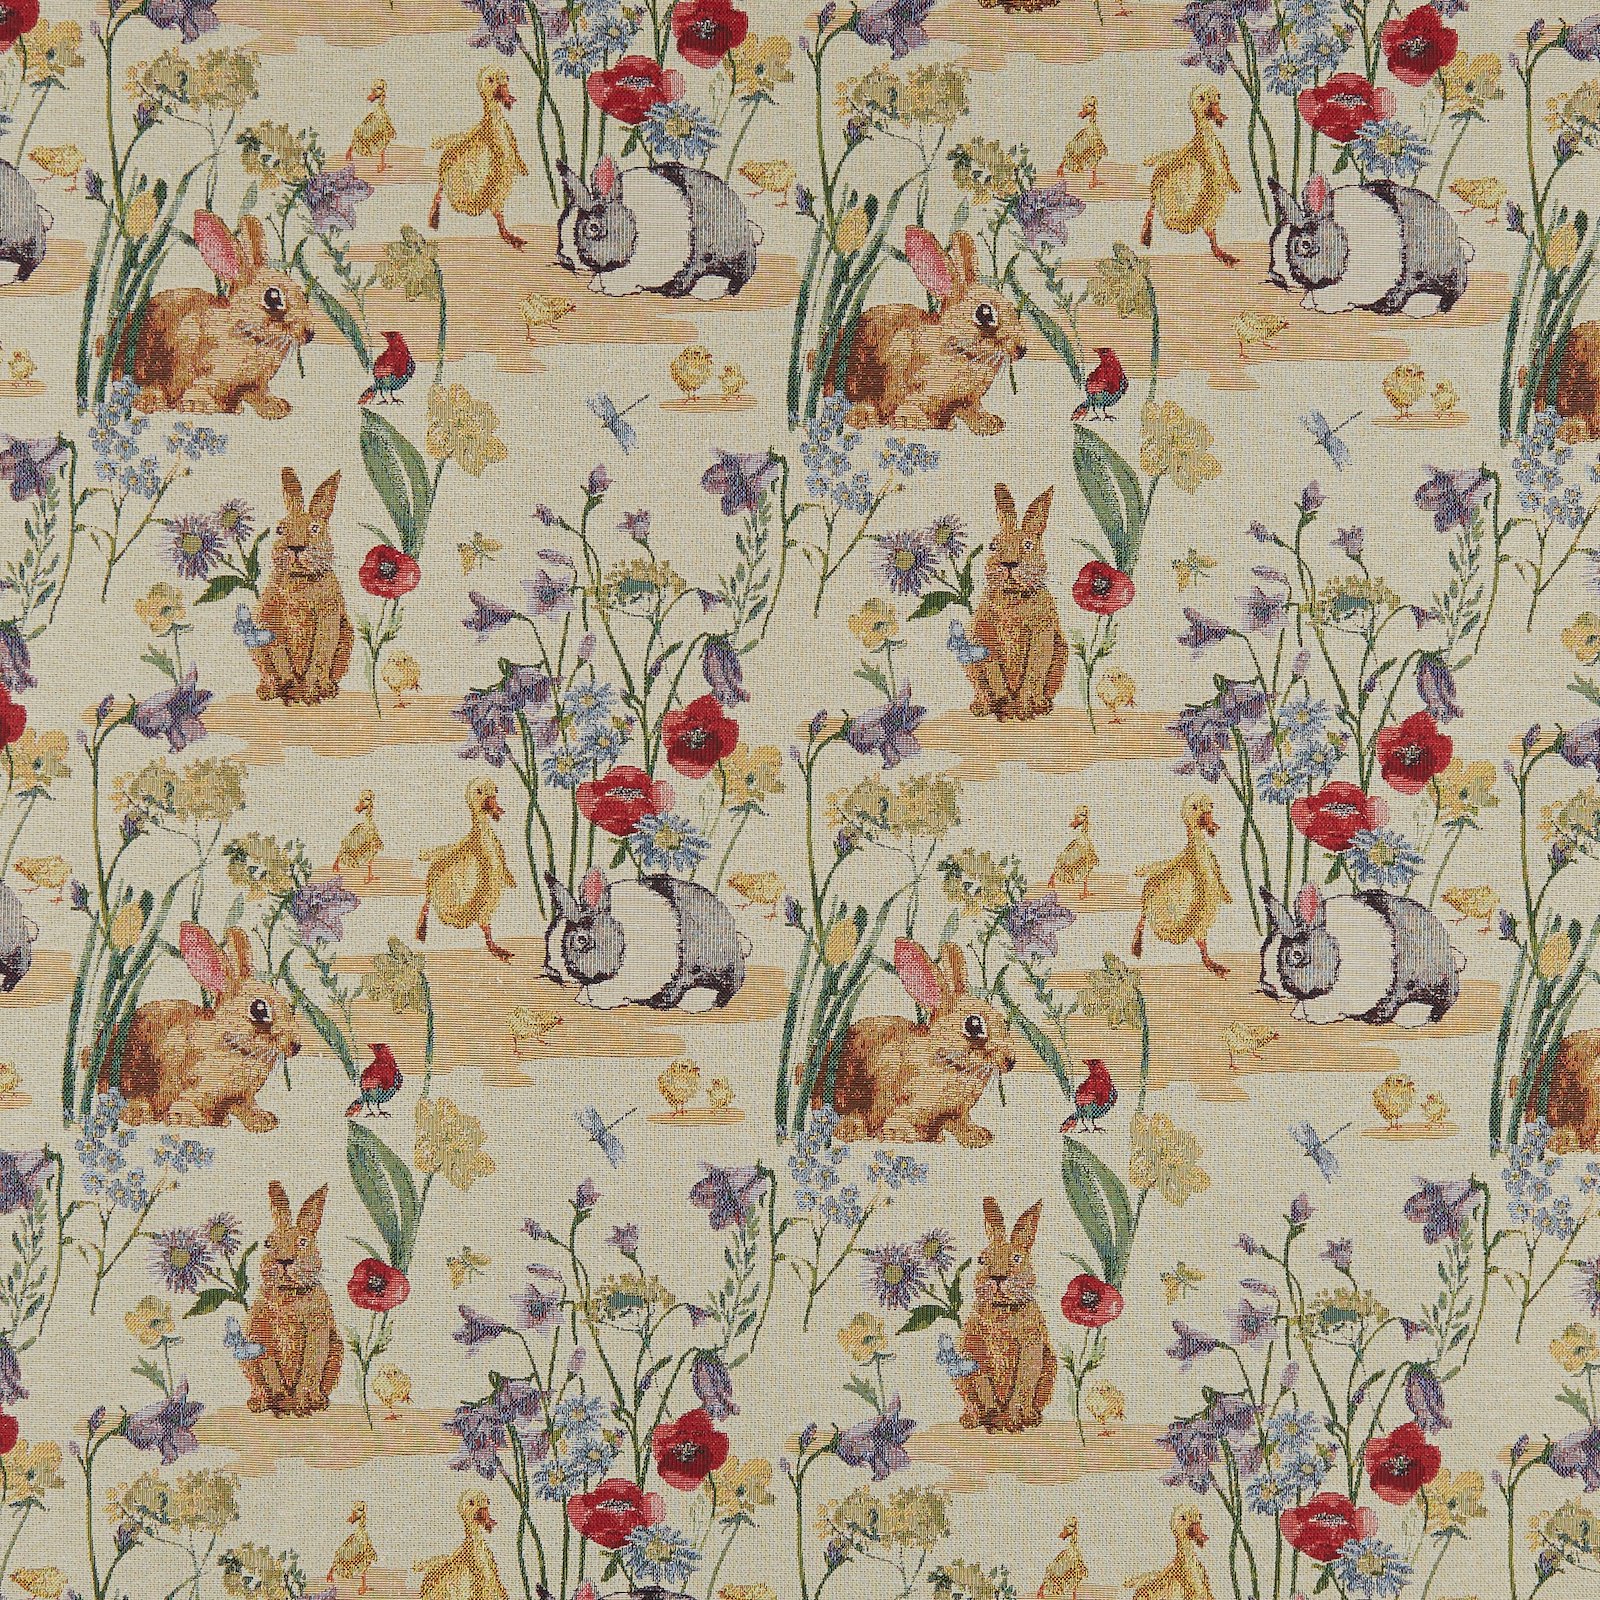 Gobelin yellow with rabbits and ducks 826664_pack_sp